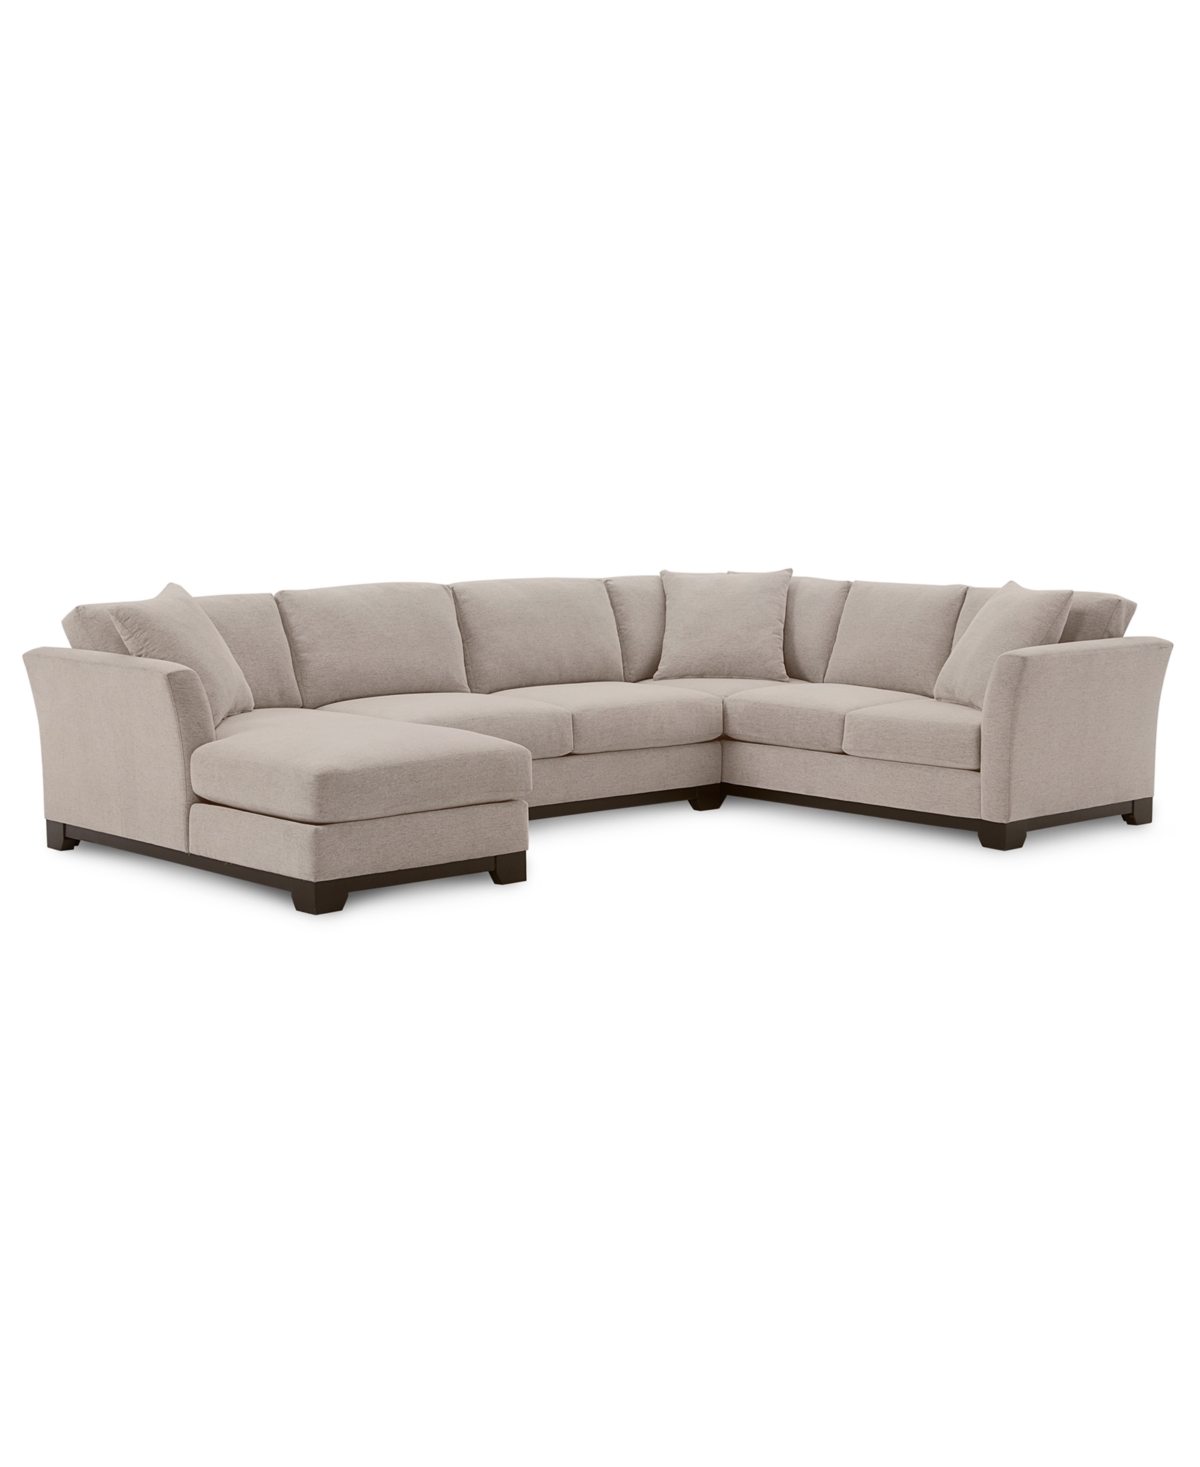 Elliot Ii 138 Fabric 3-Pc. Chaise Sectional, Created for Macys